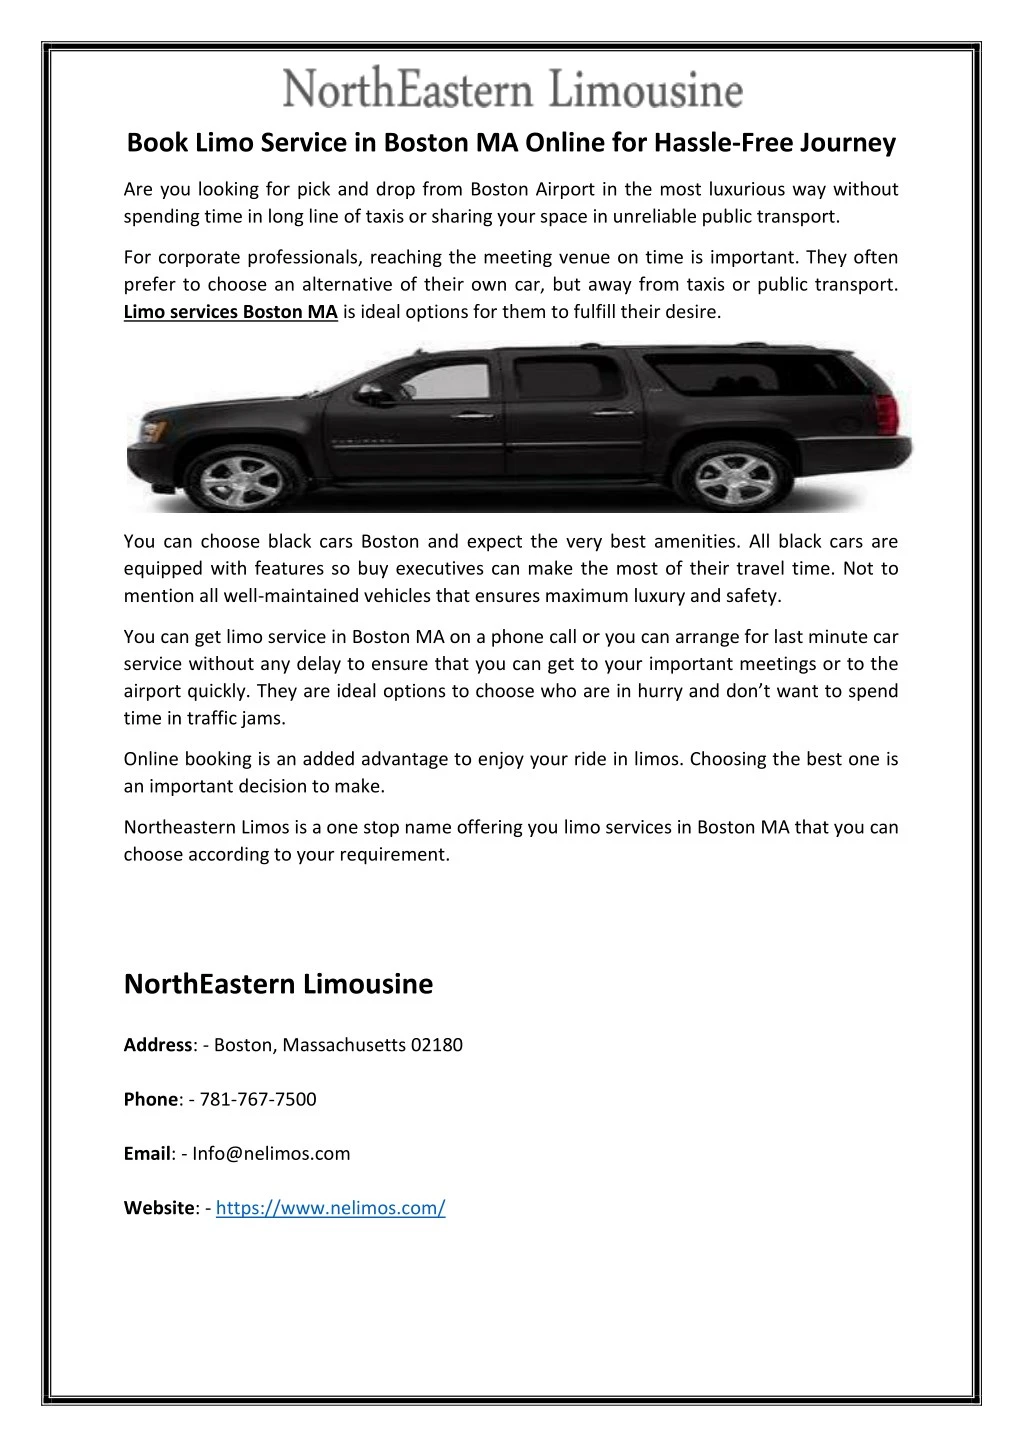 book limo service in boston ma online for hassle